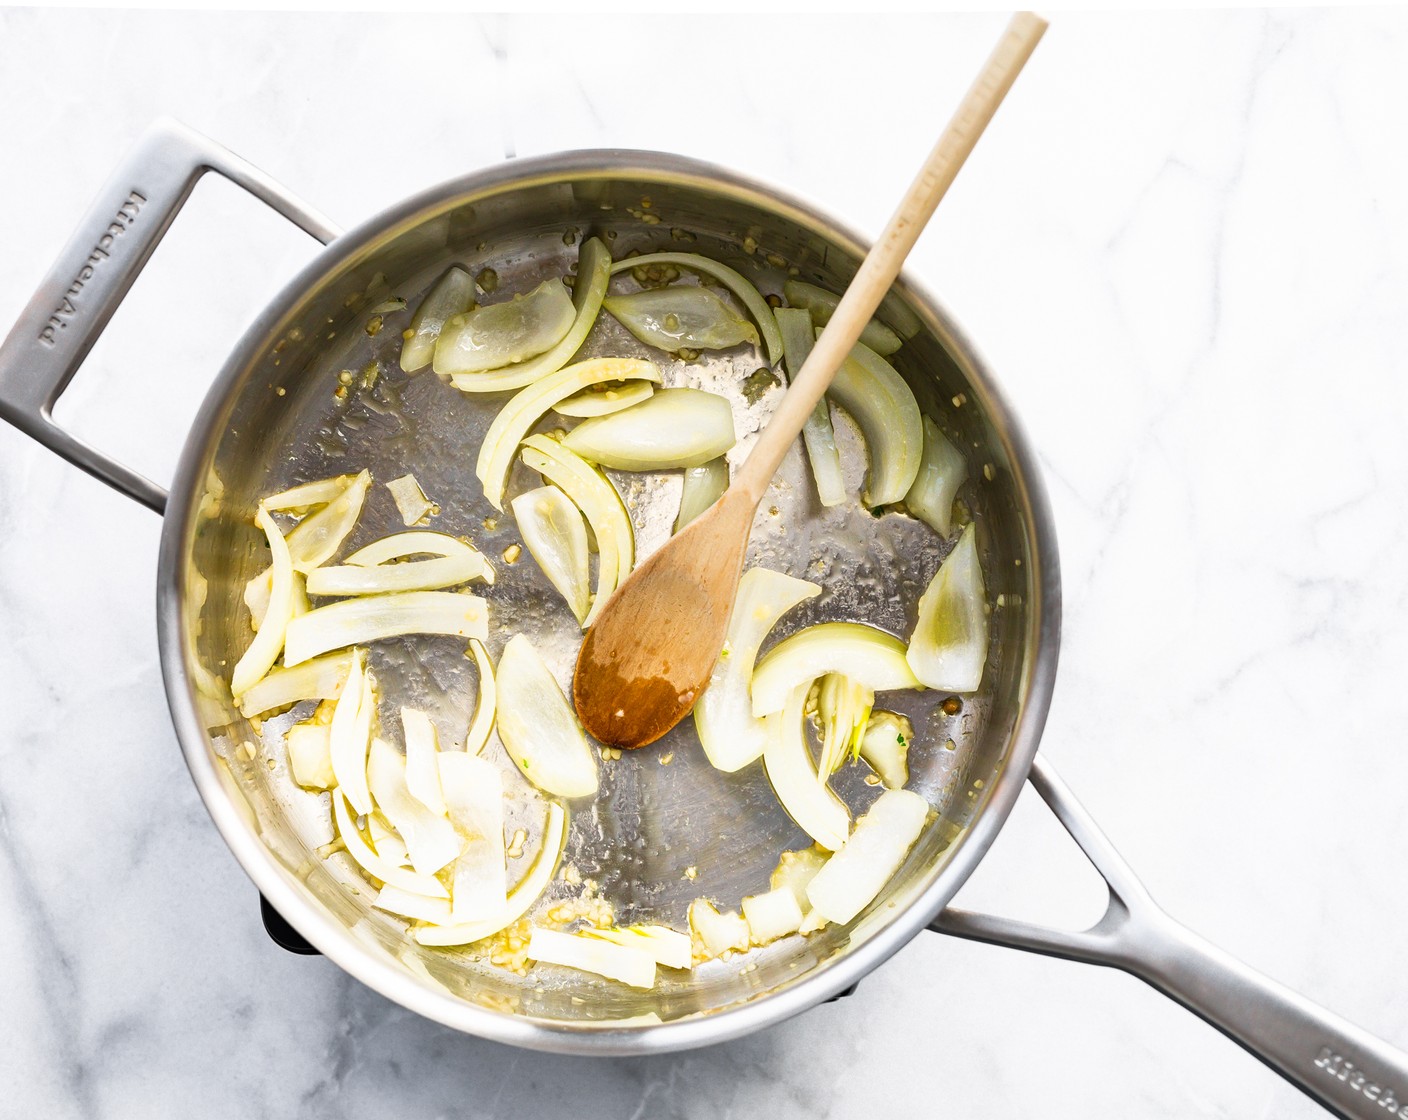 step 4 Add Oil (1 Tbsp) to the saucepan over medium heat. When the oil shimmers or the butter has melted, add Yellow Onion (1) and Garlic (1/2 Tbsp) and sauté for 3 minutes.